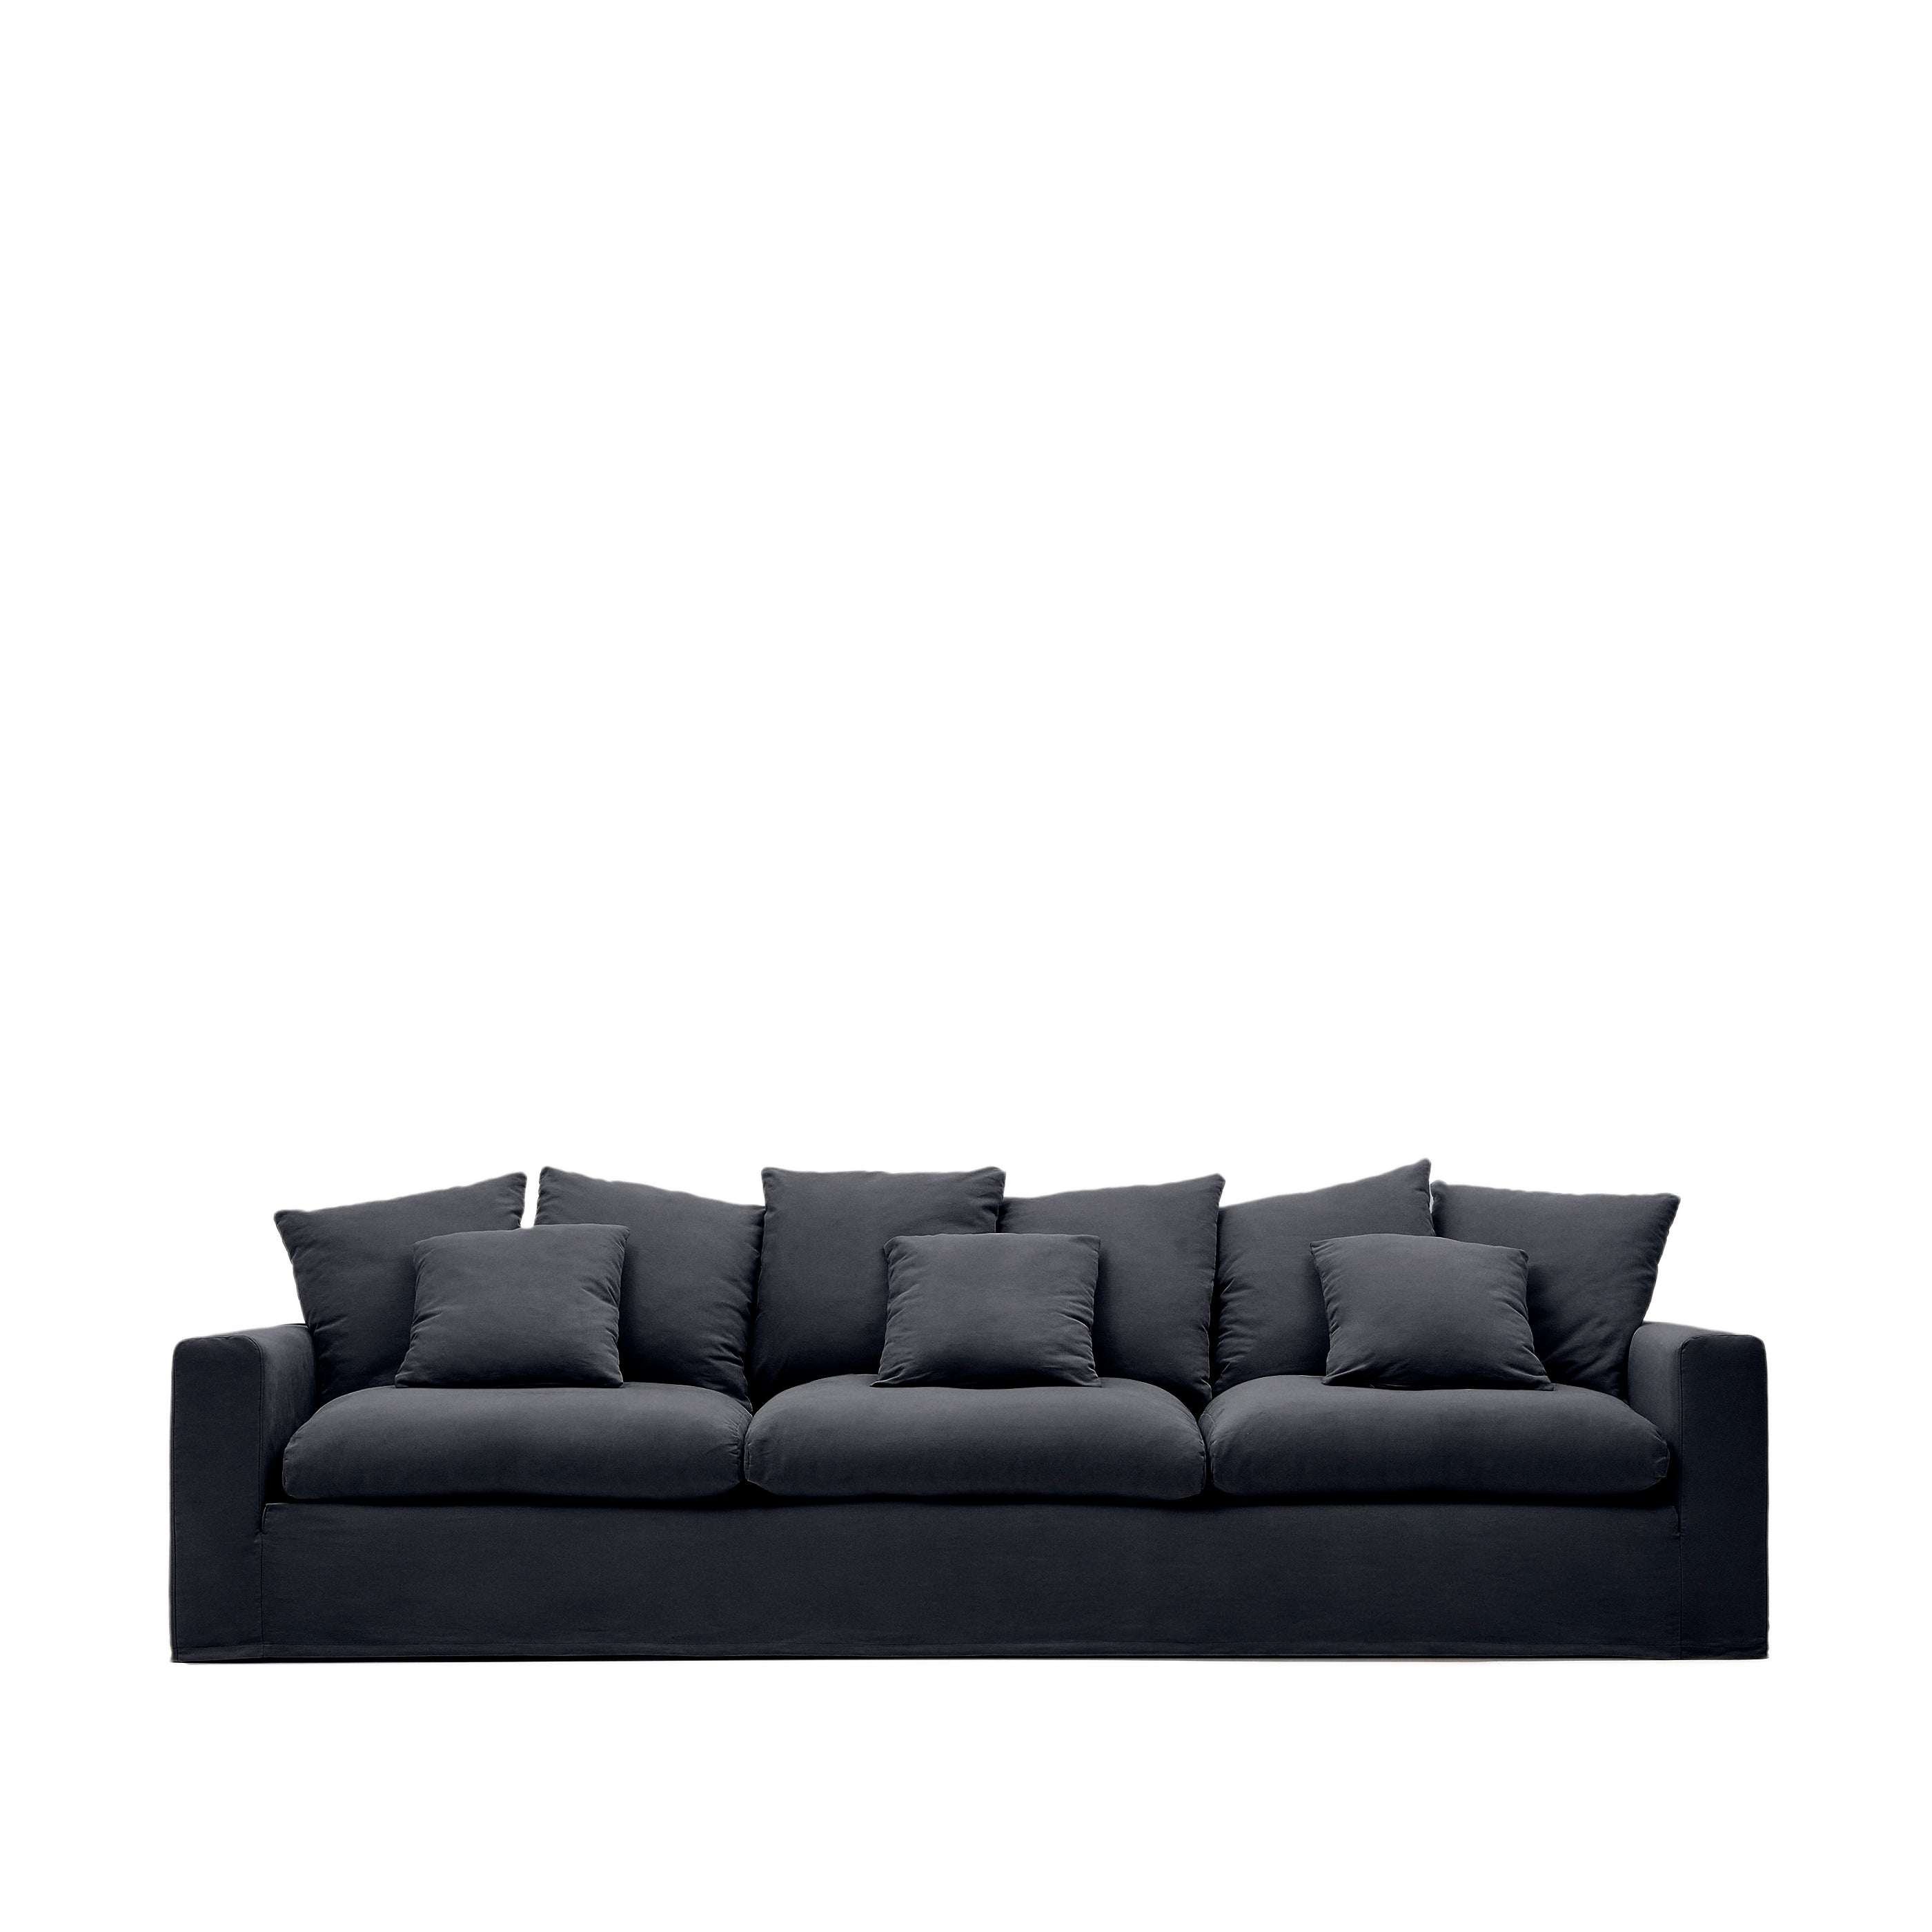 Nora 4-seater sofa with removable cover and anthracite gray linen and cotton cushions, 340 cm